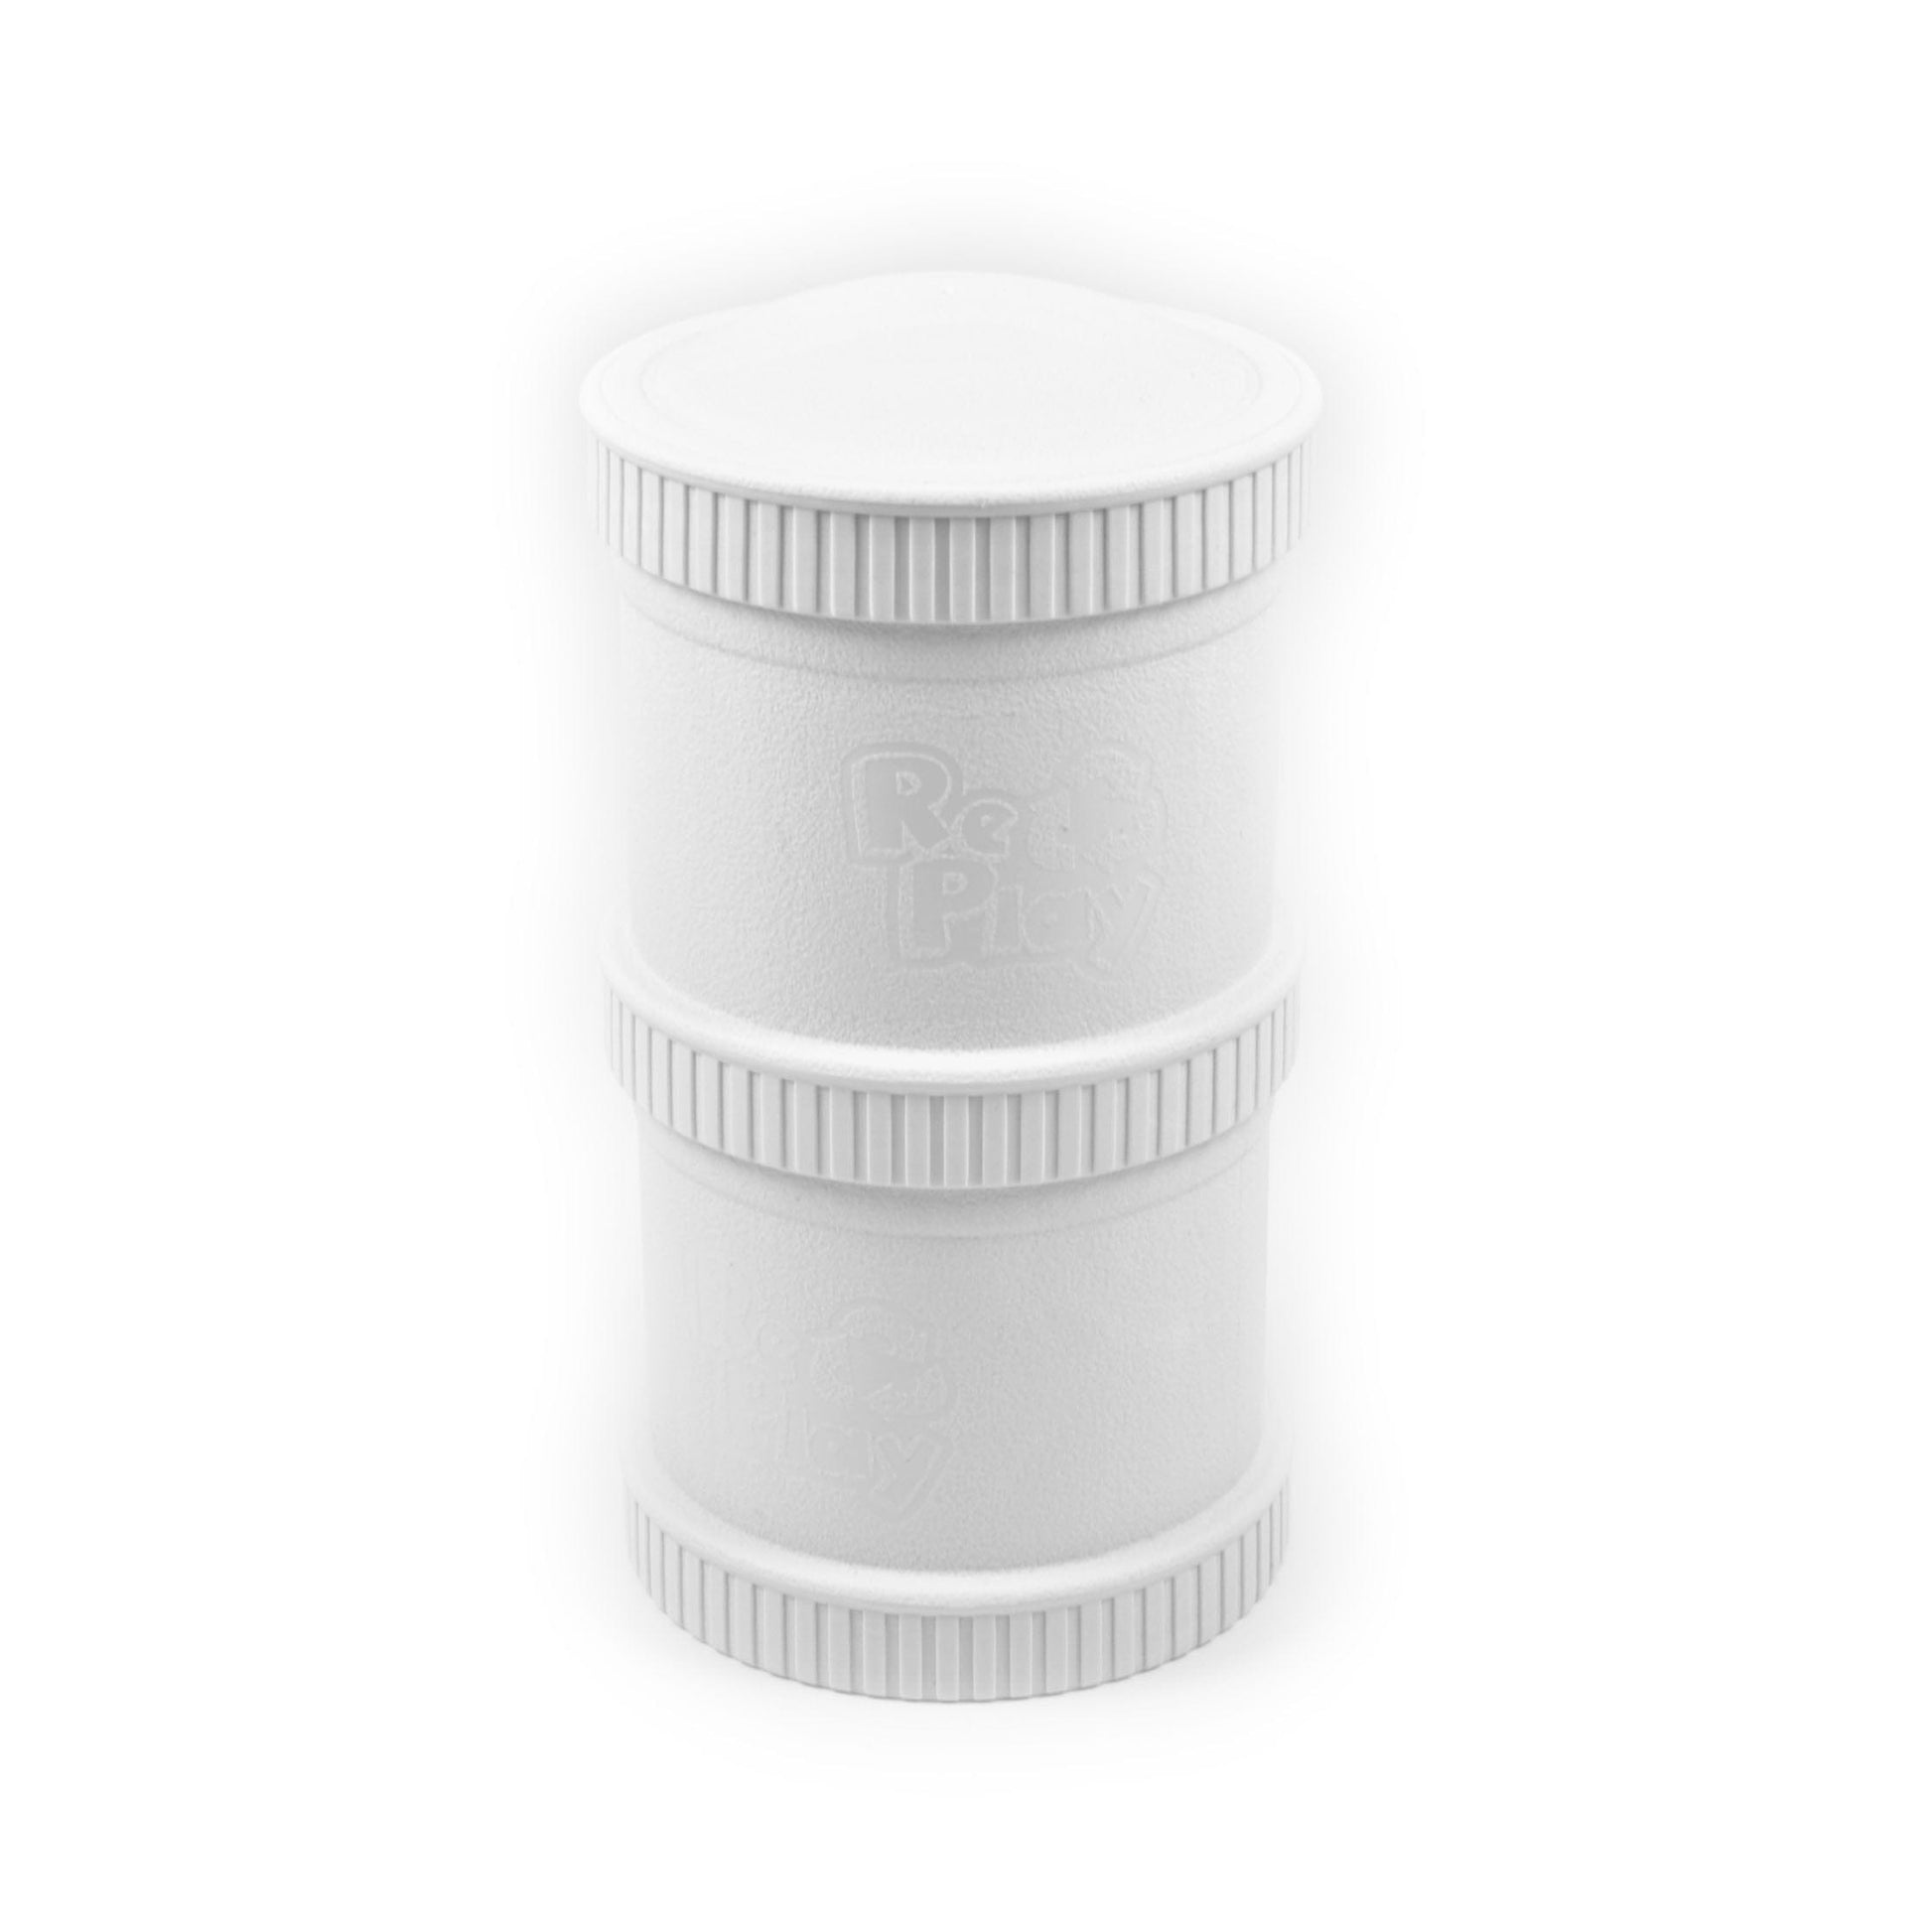 Re-Play Snack Stack (2 Pods & 1 Lid) 200ml White RP-SnackStack-2Wht